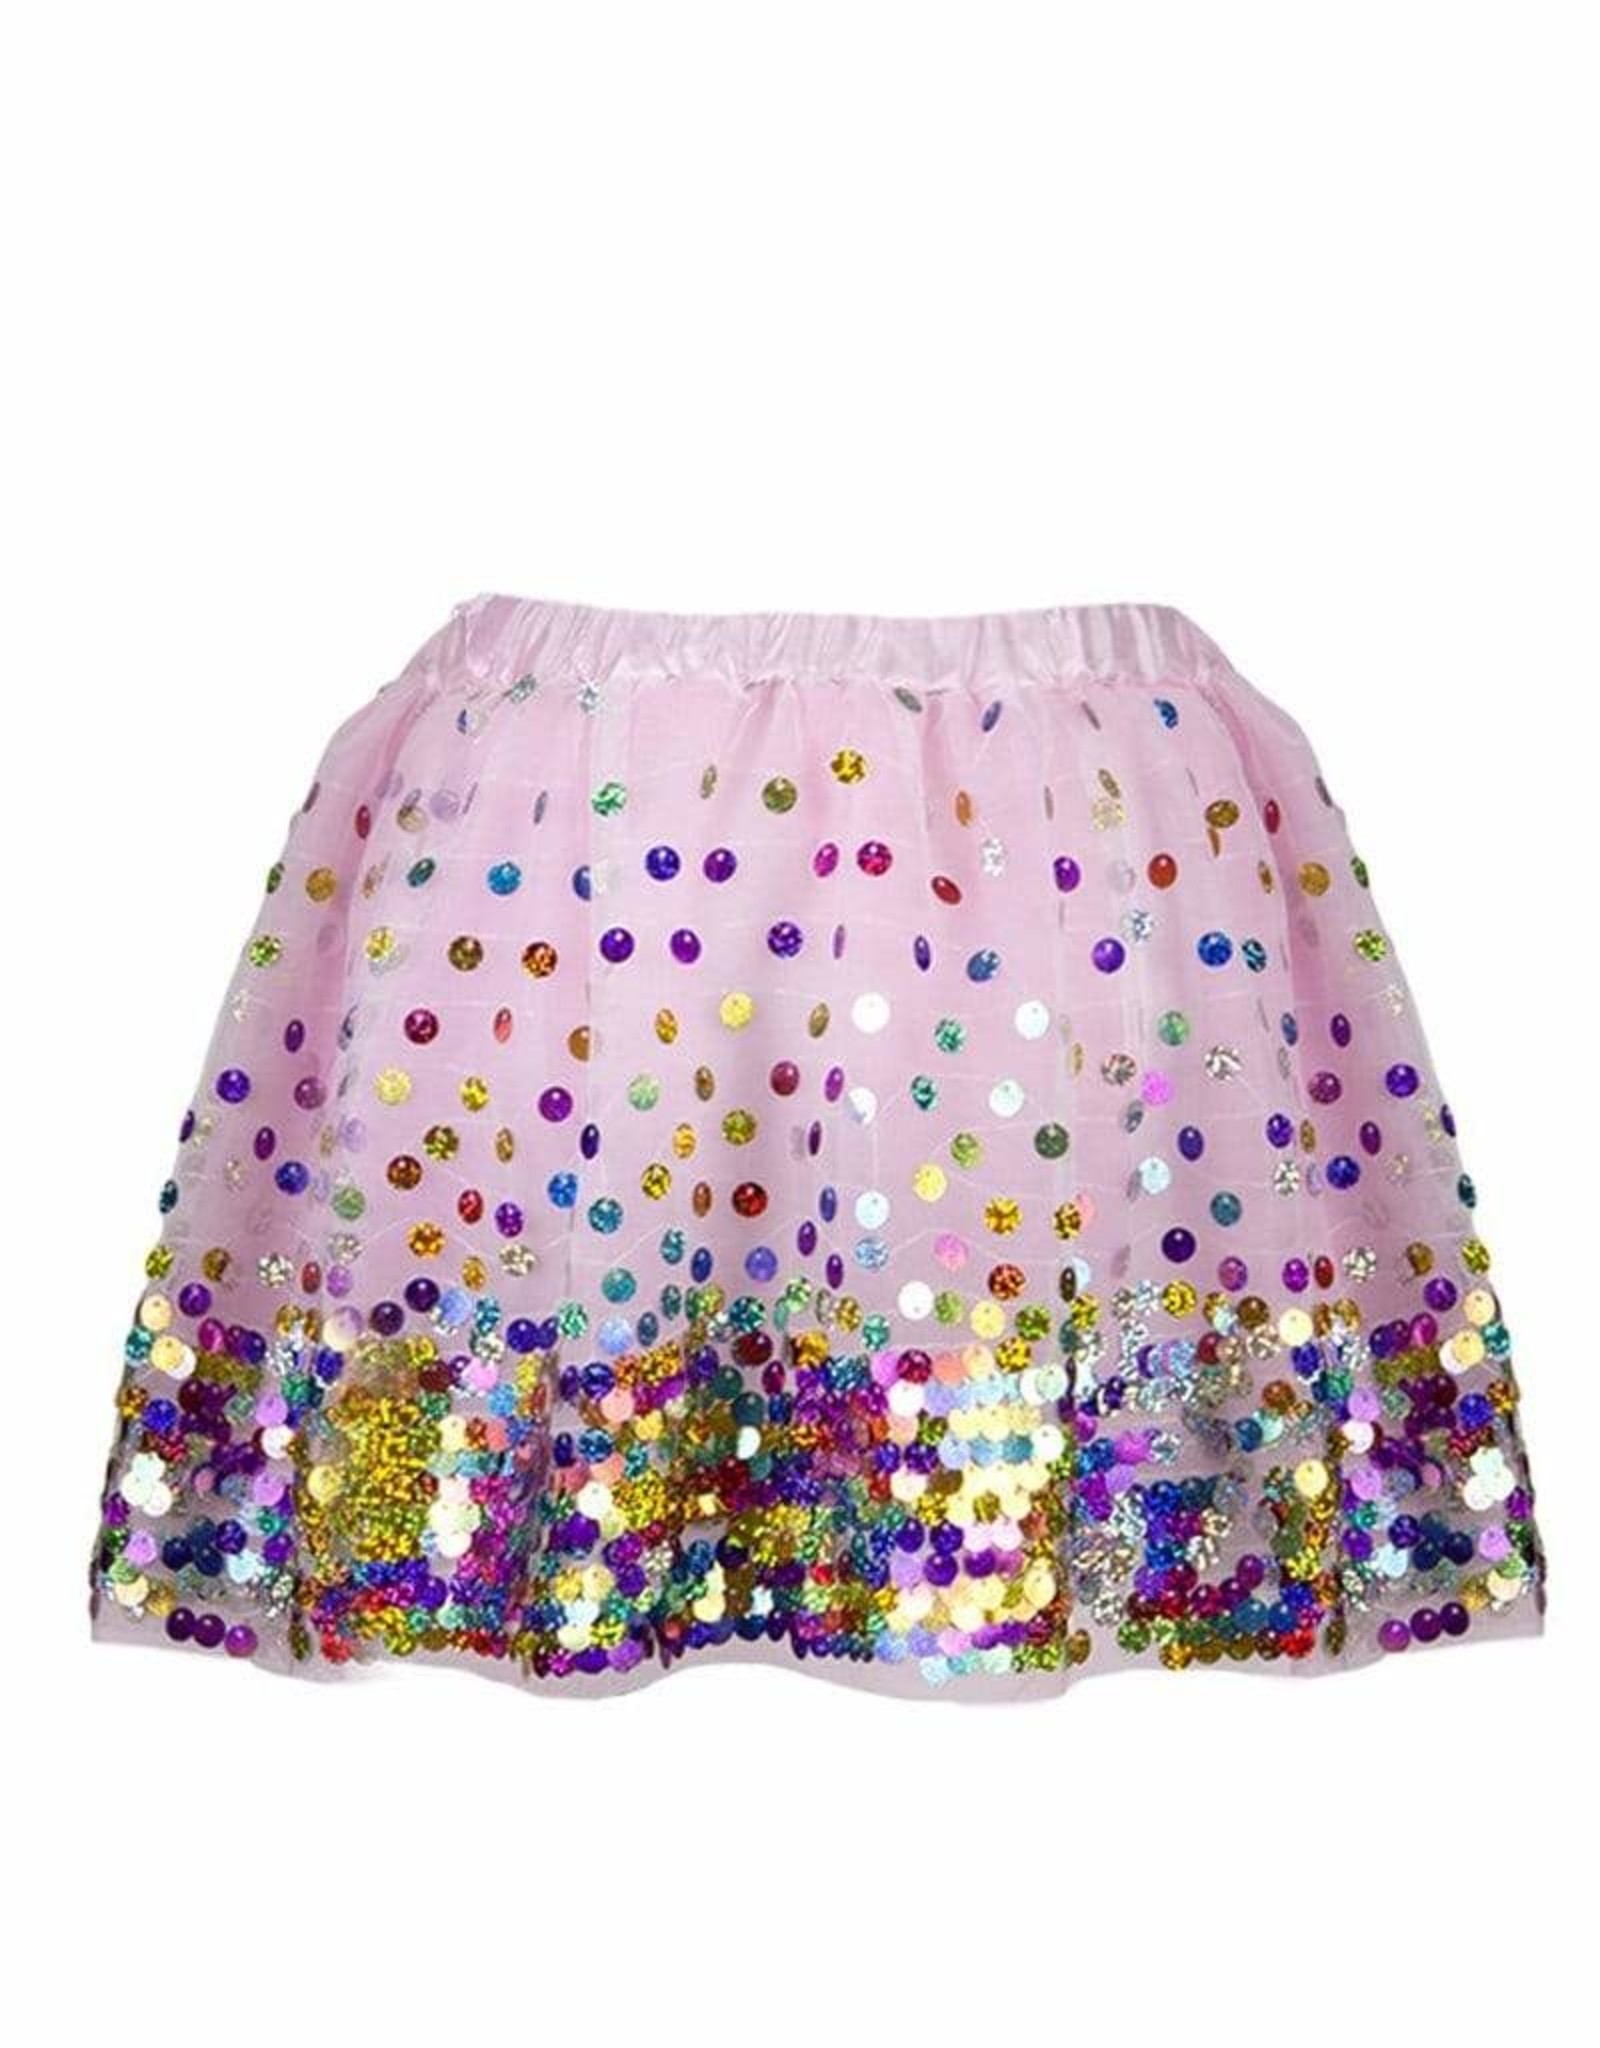 Great Pretenders Party Fun Sequin Skirt, Size 4-6